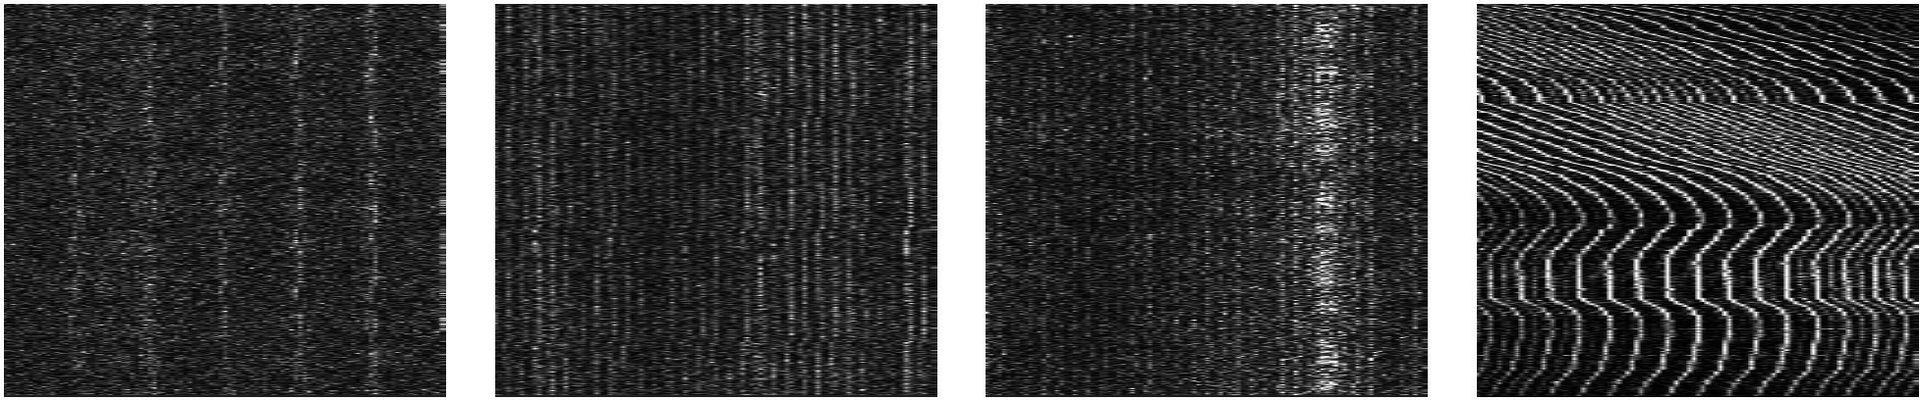 UCLA SETI - Examples of the radio signal images that participants will be asked to review.